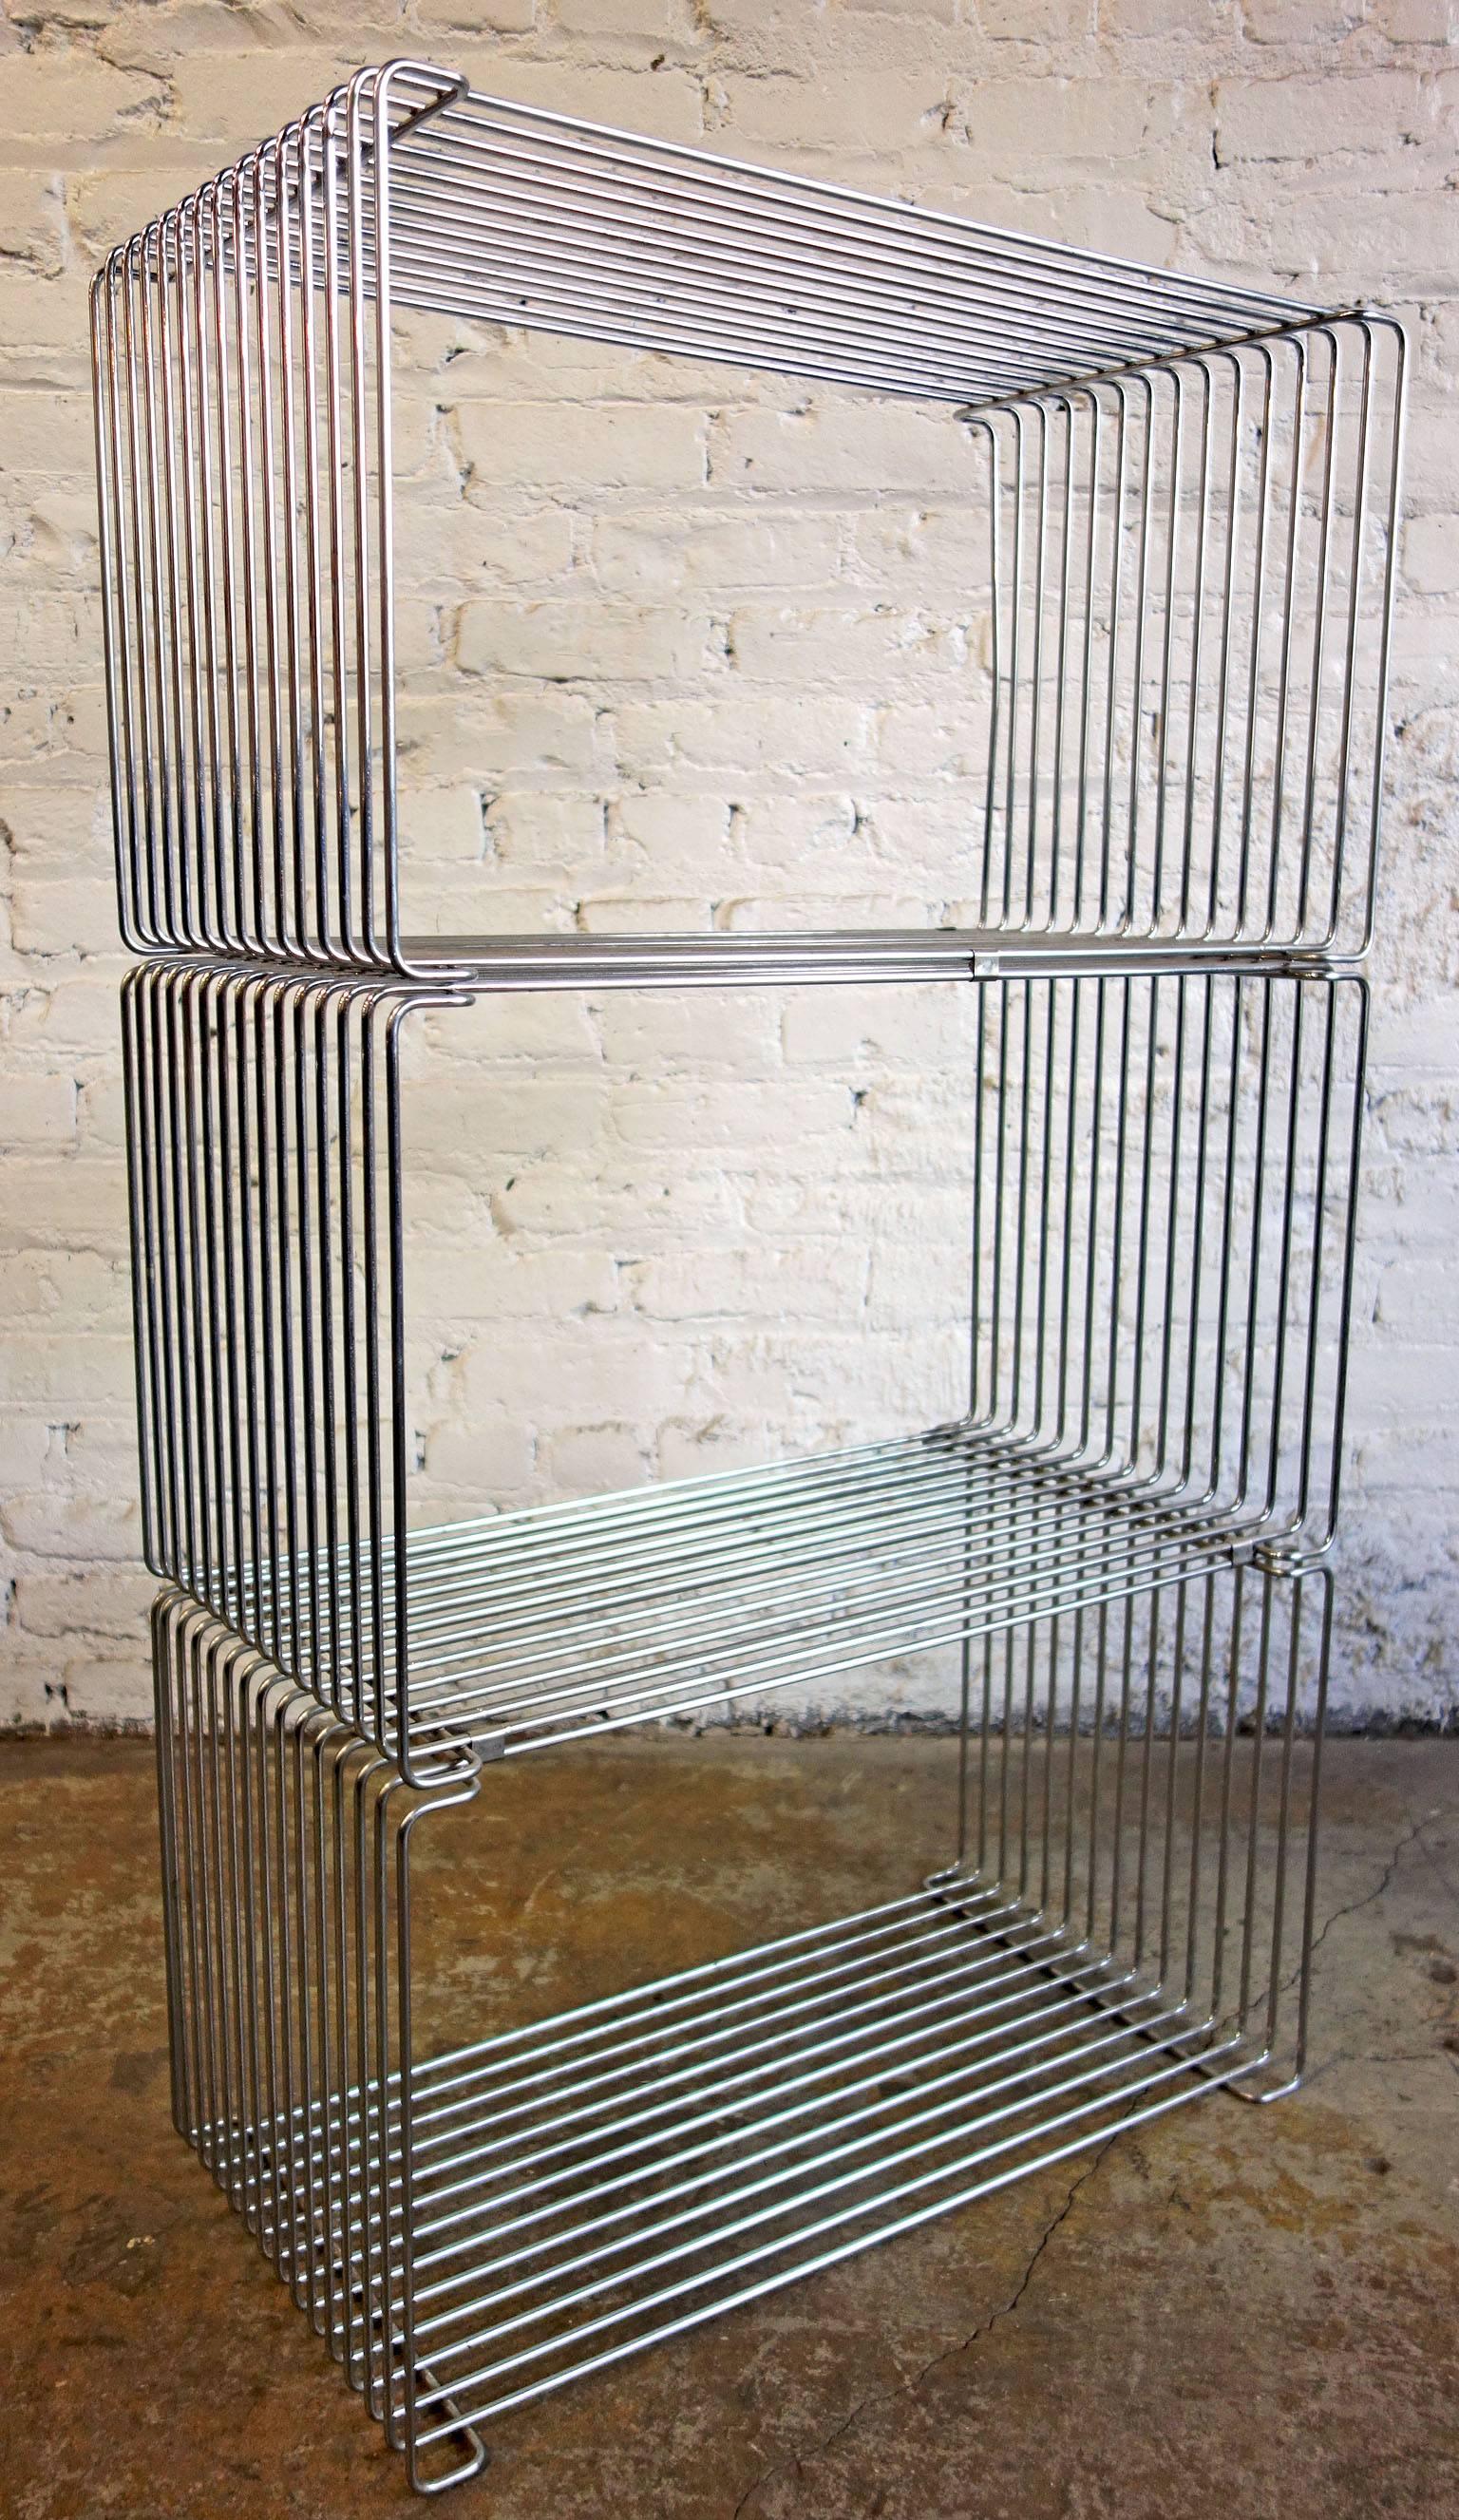 Rare Mid-Century Verner Panton Pantonova wire cube for Fritz Hansen.
They can be used as a stool or side table. Multiples can be configured into a wall unit.

Priced per cube section. One left